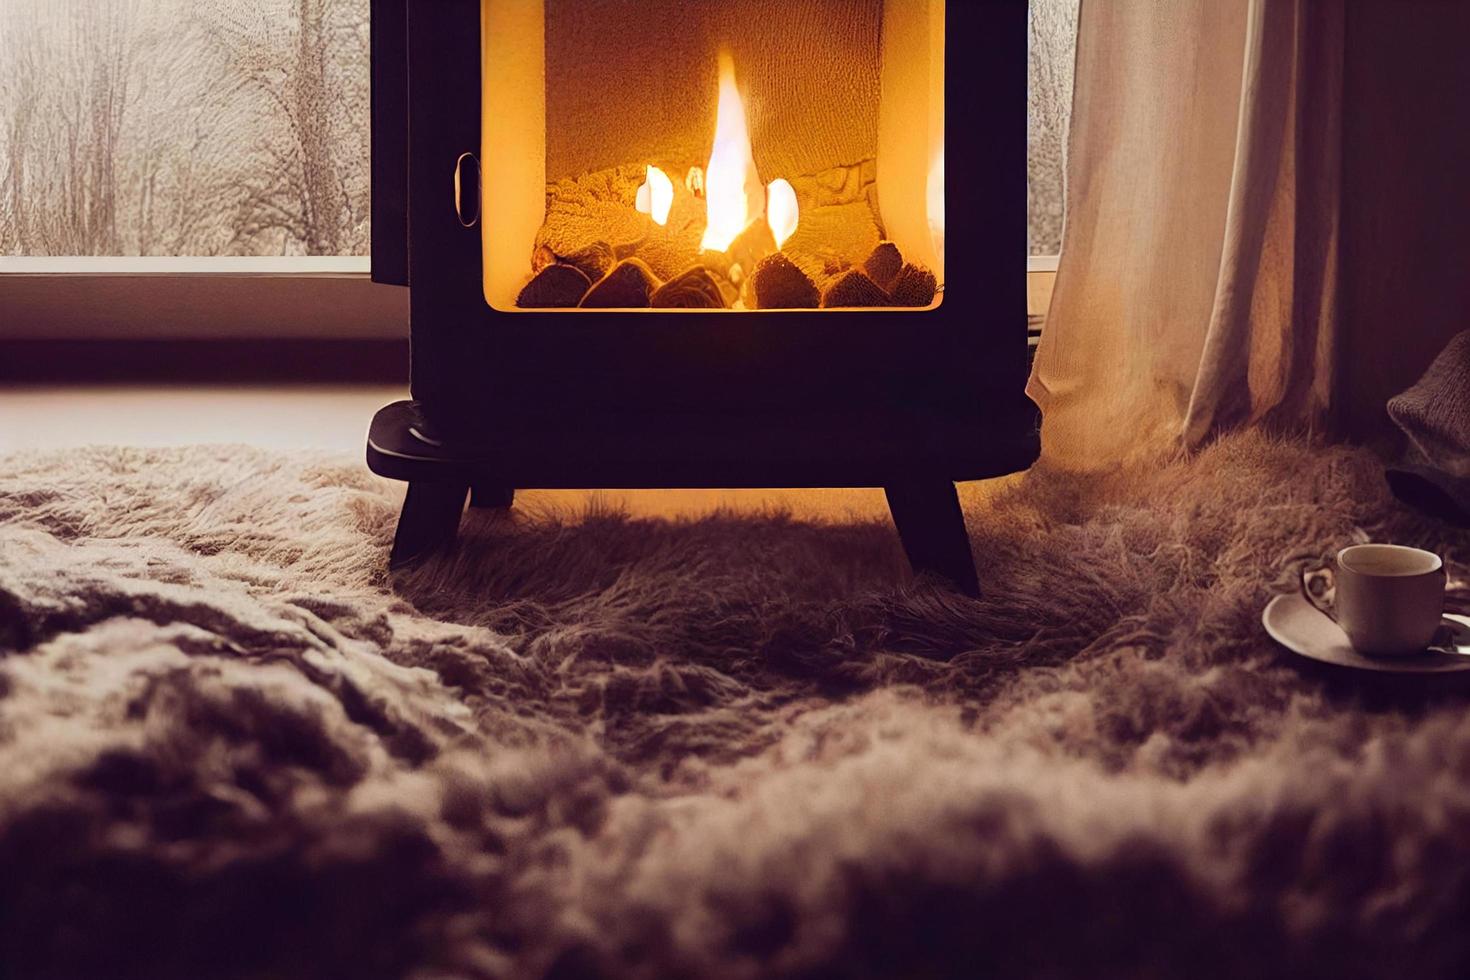 Hygge related imagery of a room with hot burning fire and a sweeter cozy warmth relaxation photo